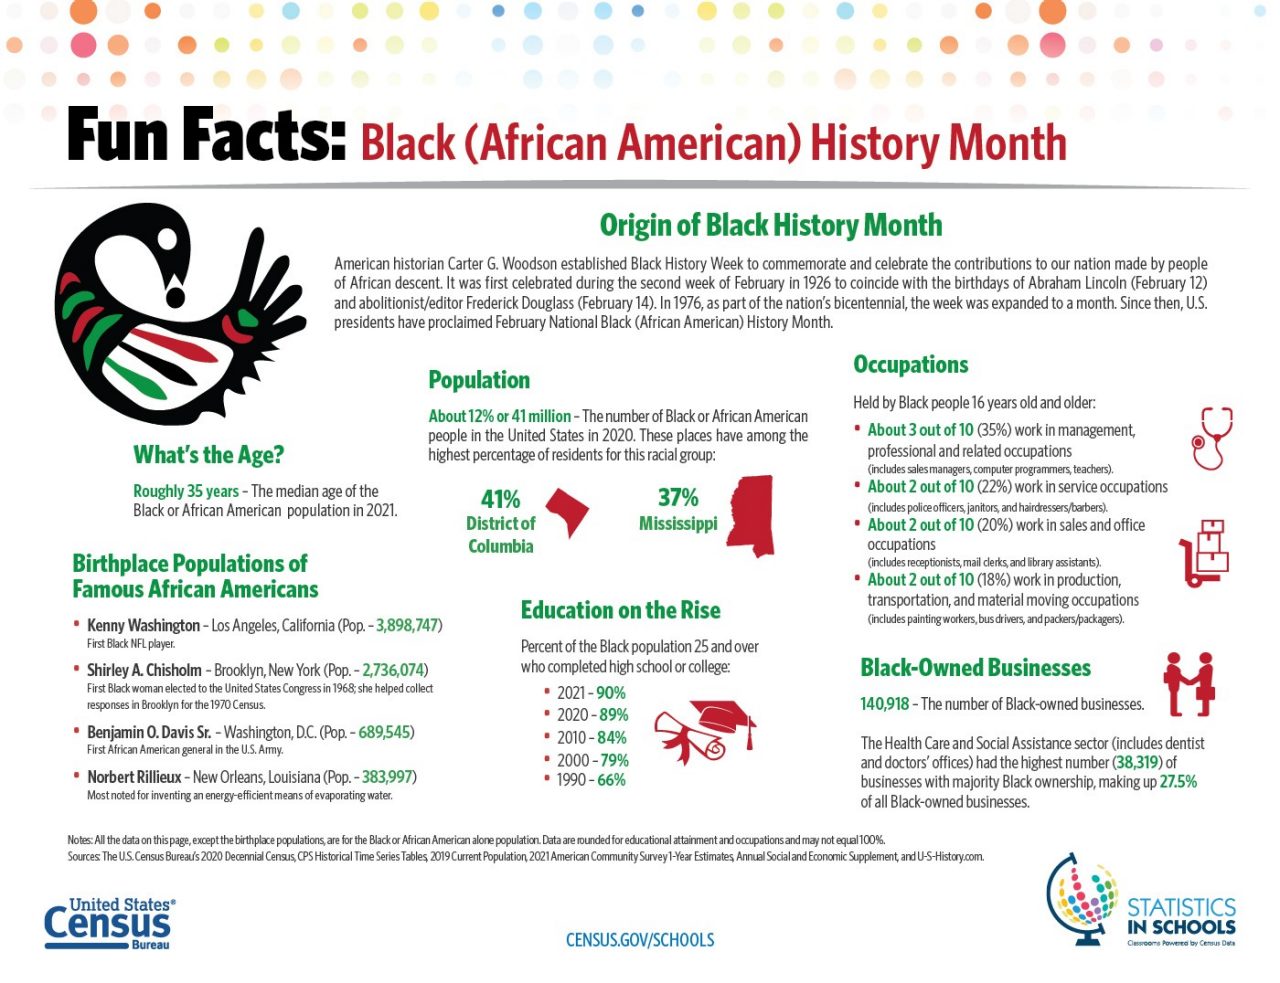 Fun Facts: Black (African American) History Month